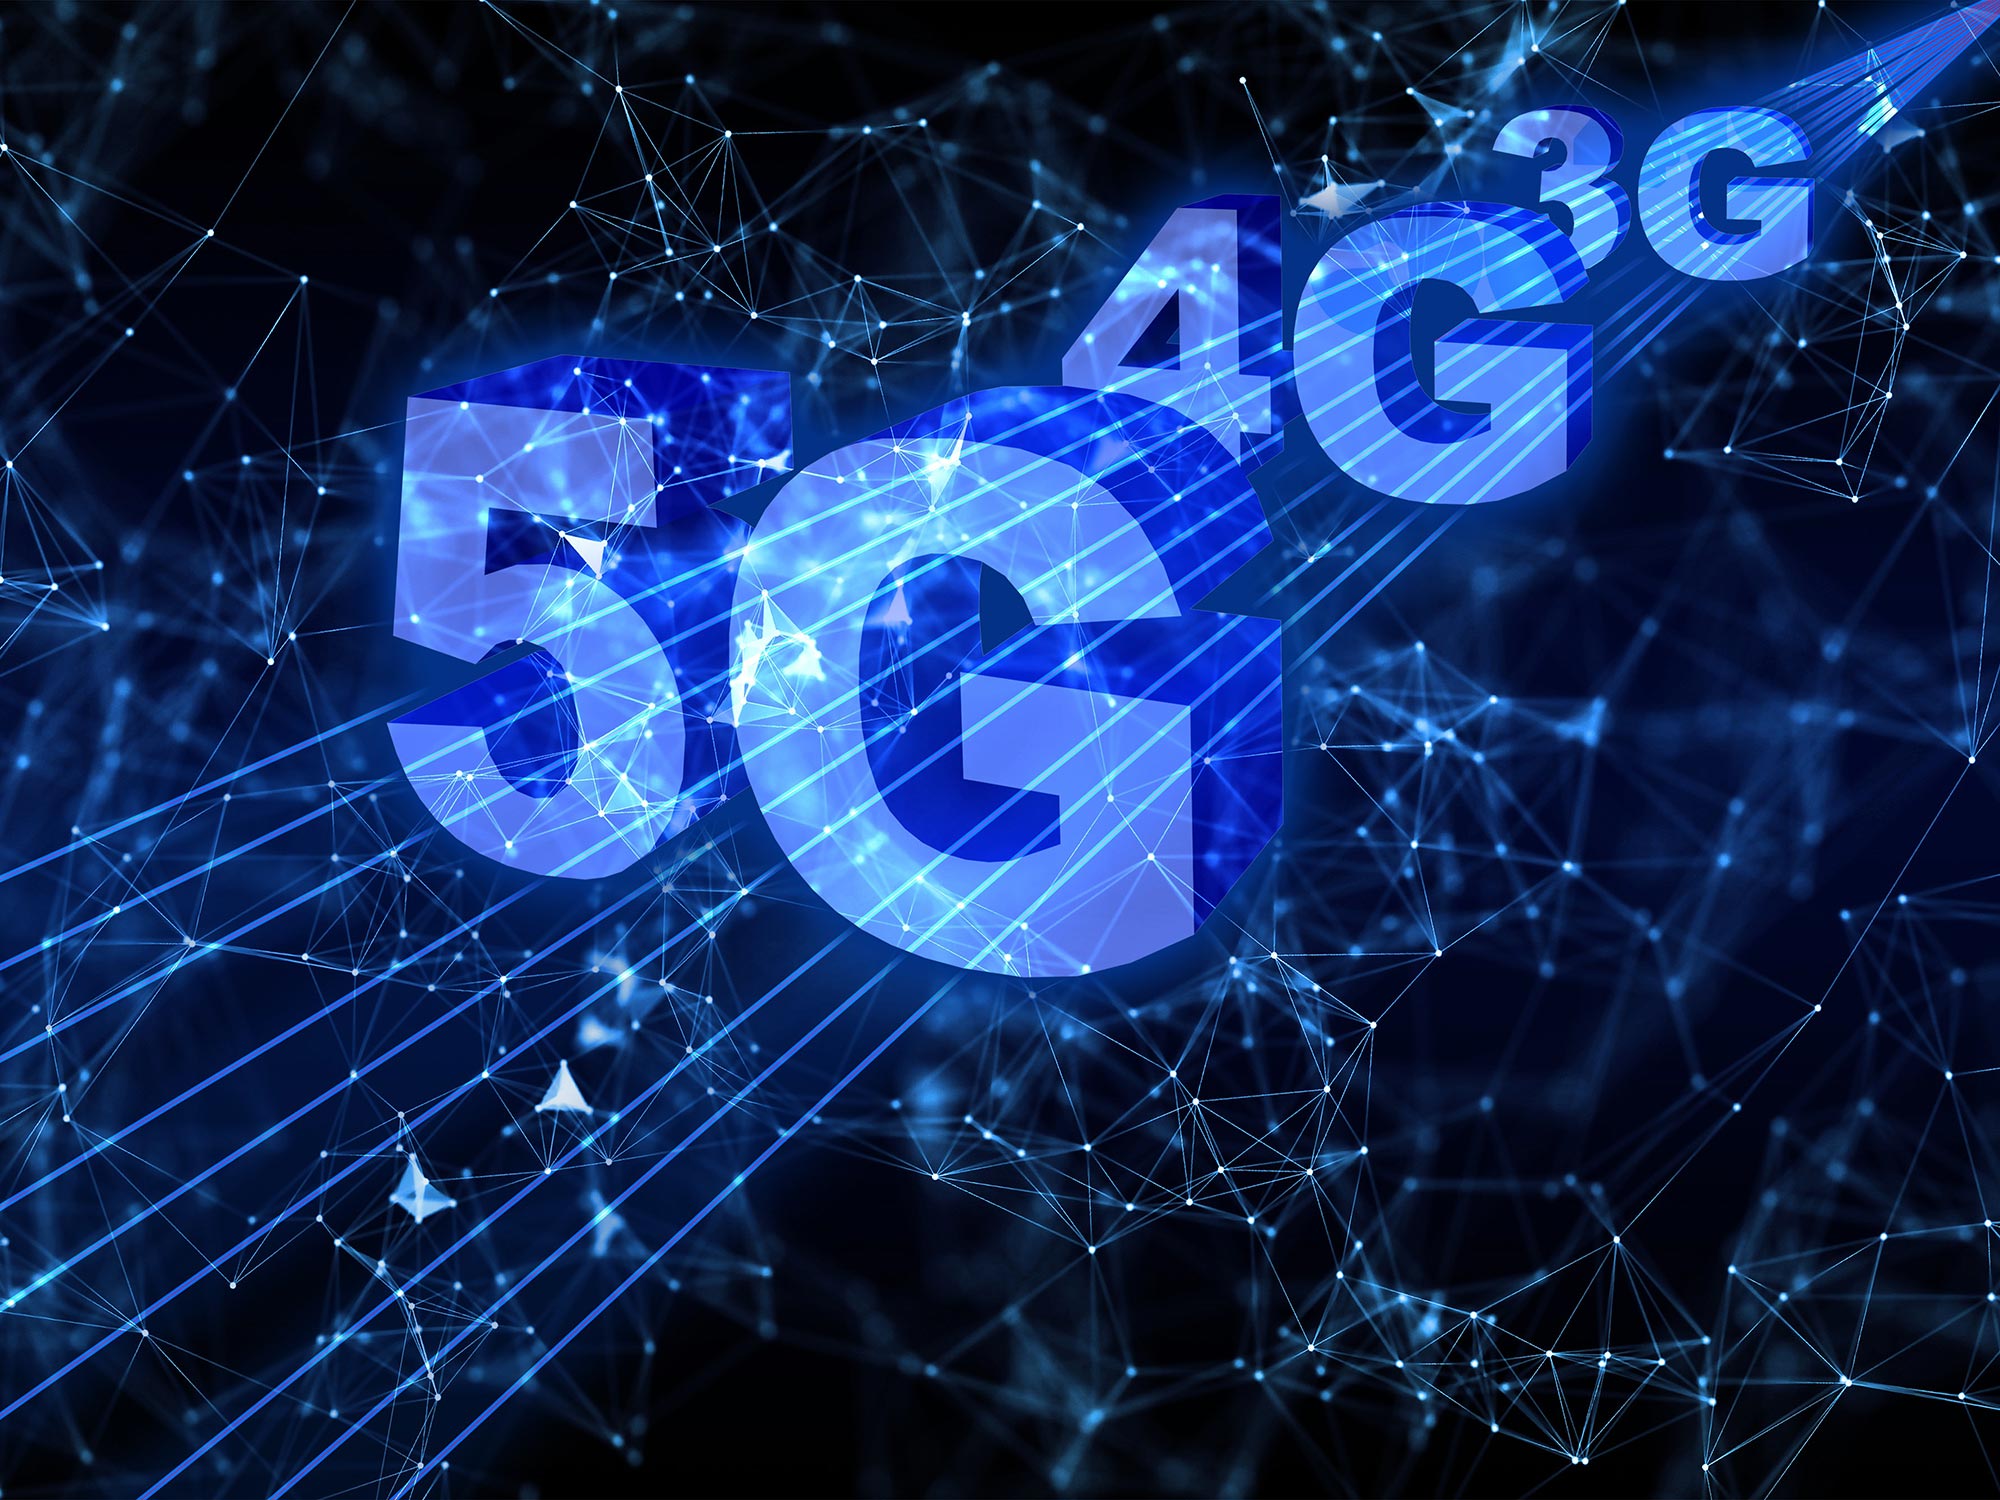 Stop the global deployment of 5G networks until security is confirmed